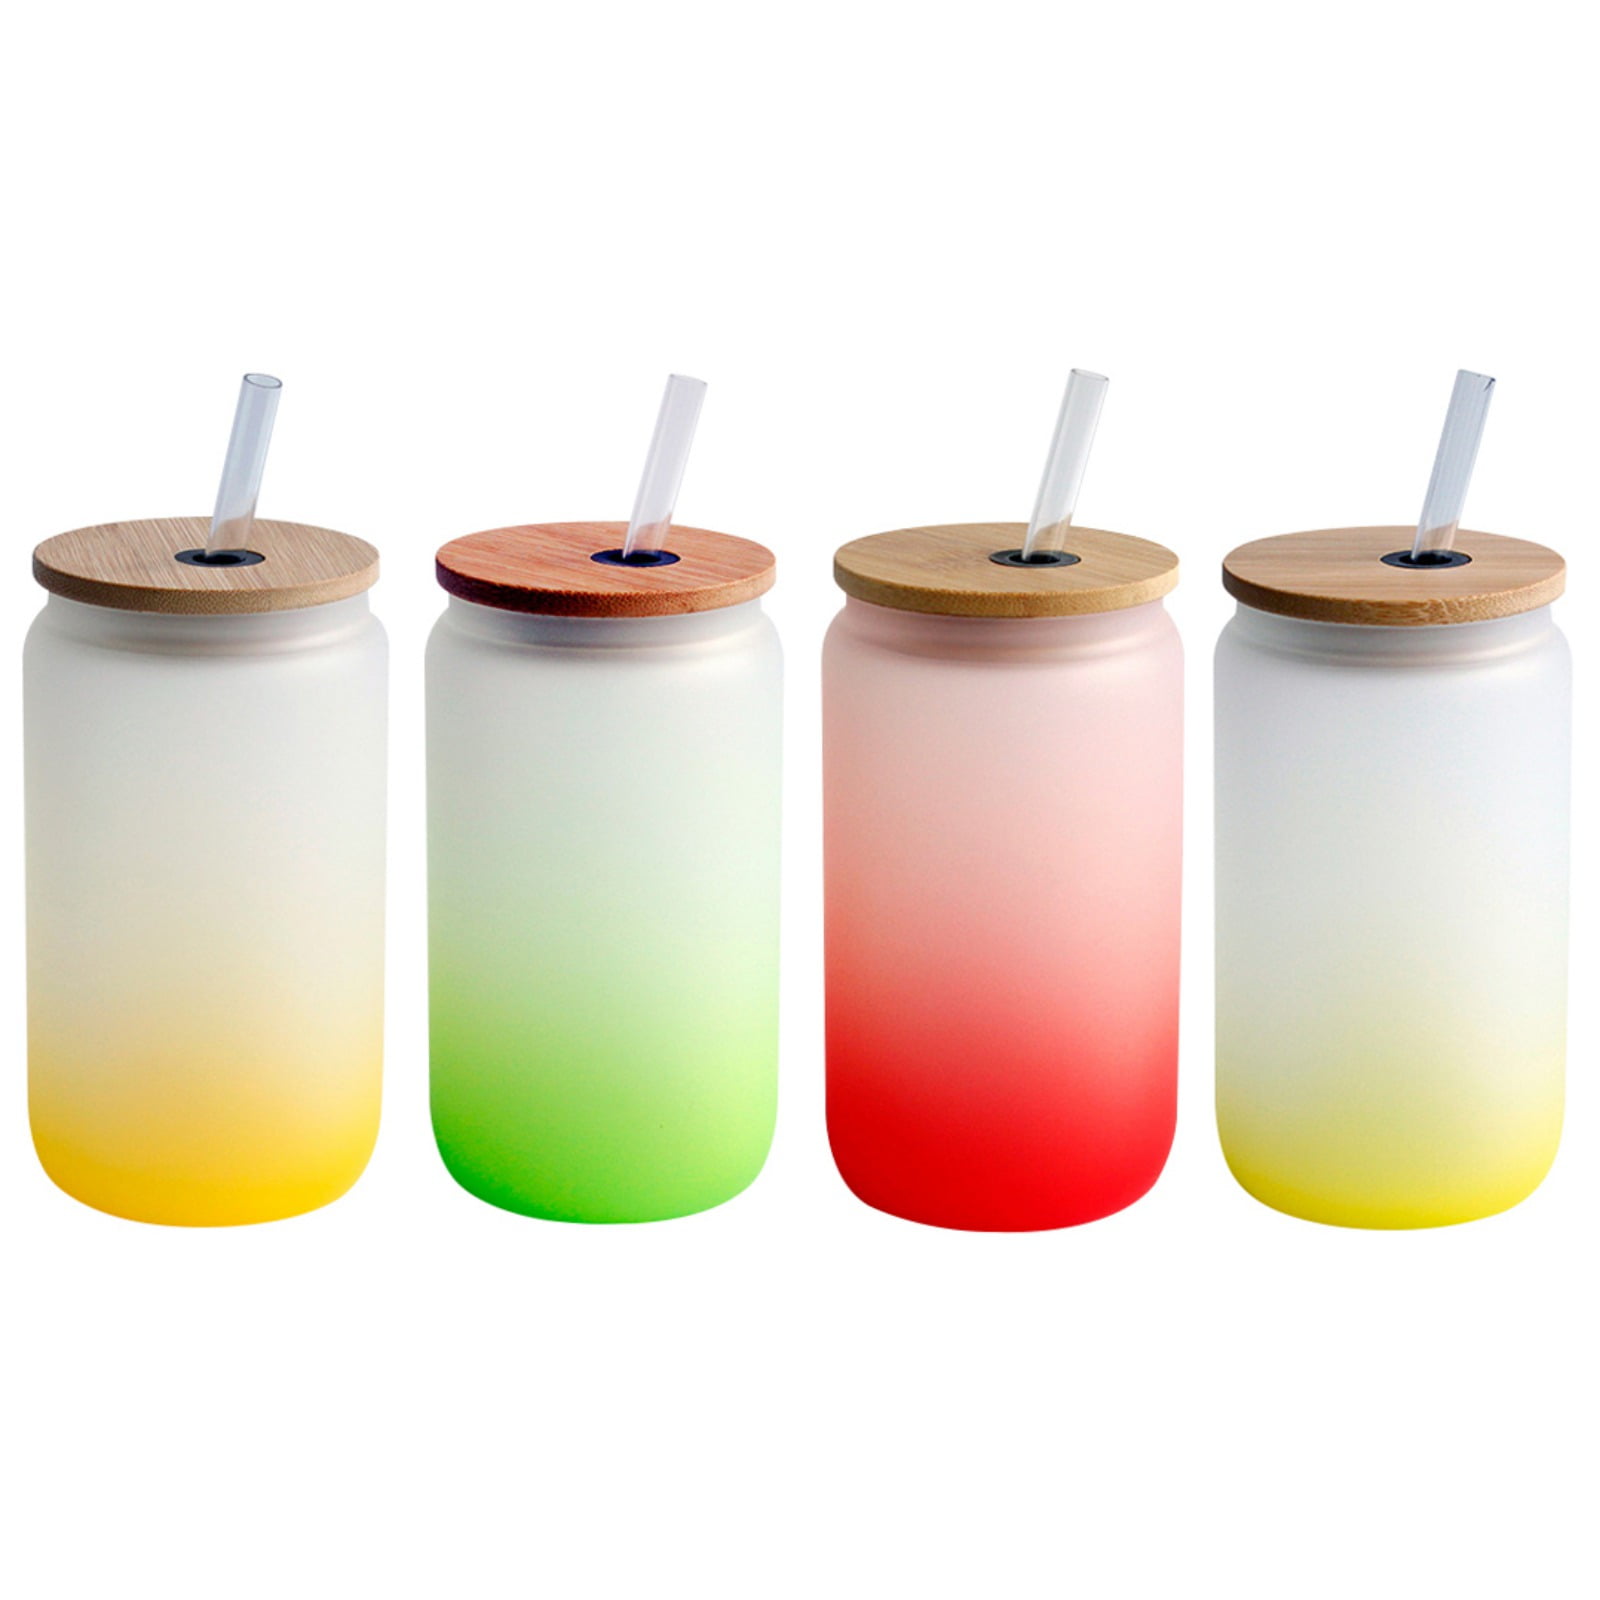 TOLDATLI Frosted Glass Cups with lids and Straws, 12oz Frosted Glass with  Bamboo lids, 8Pack Iced Co…See more TOLDATLI Frosted Glass Cups with lids